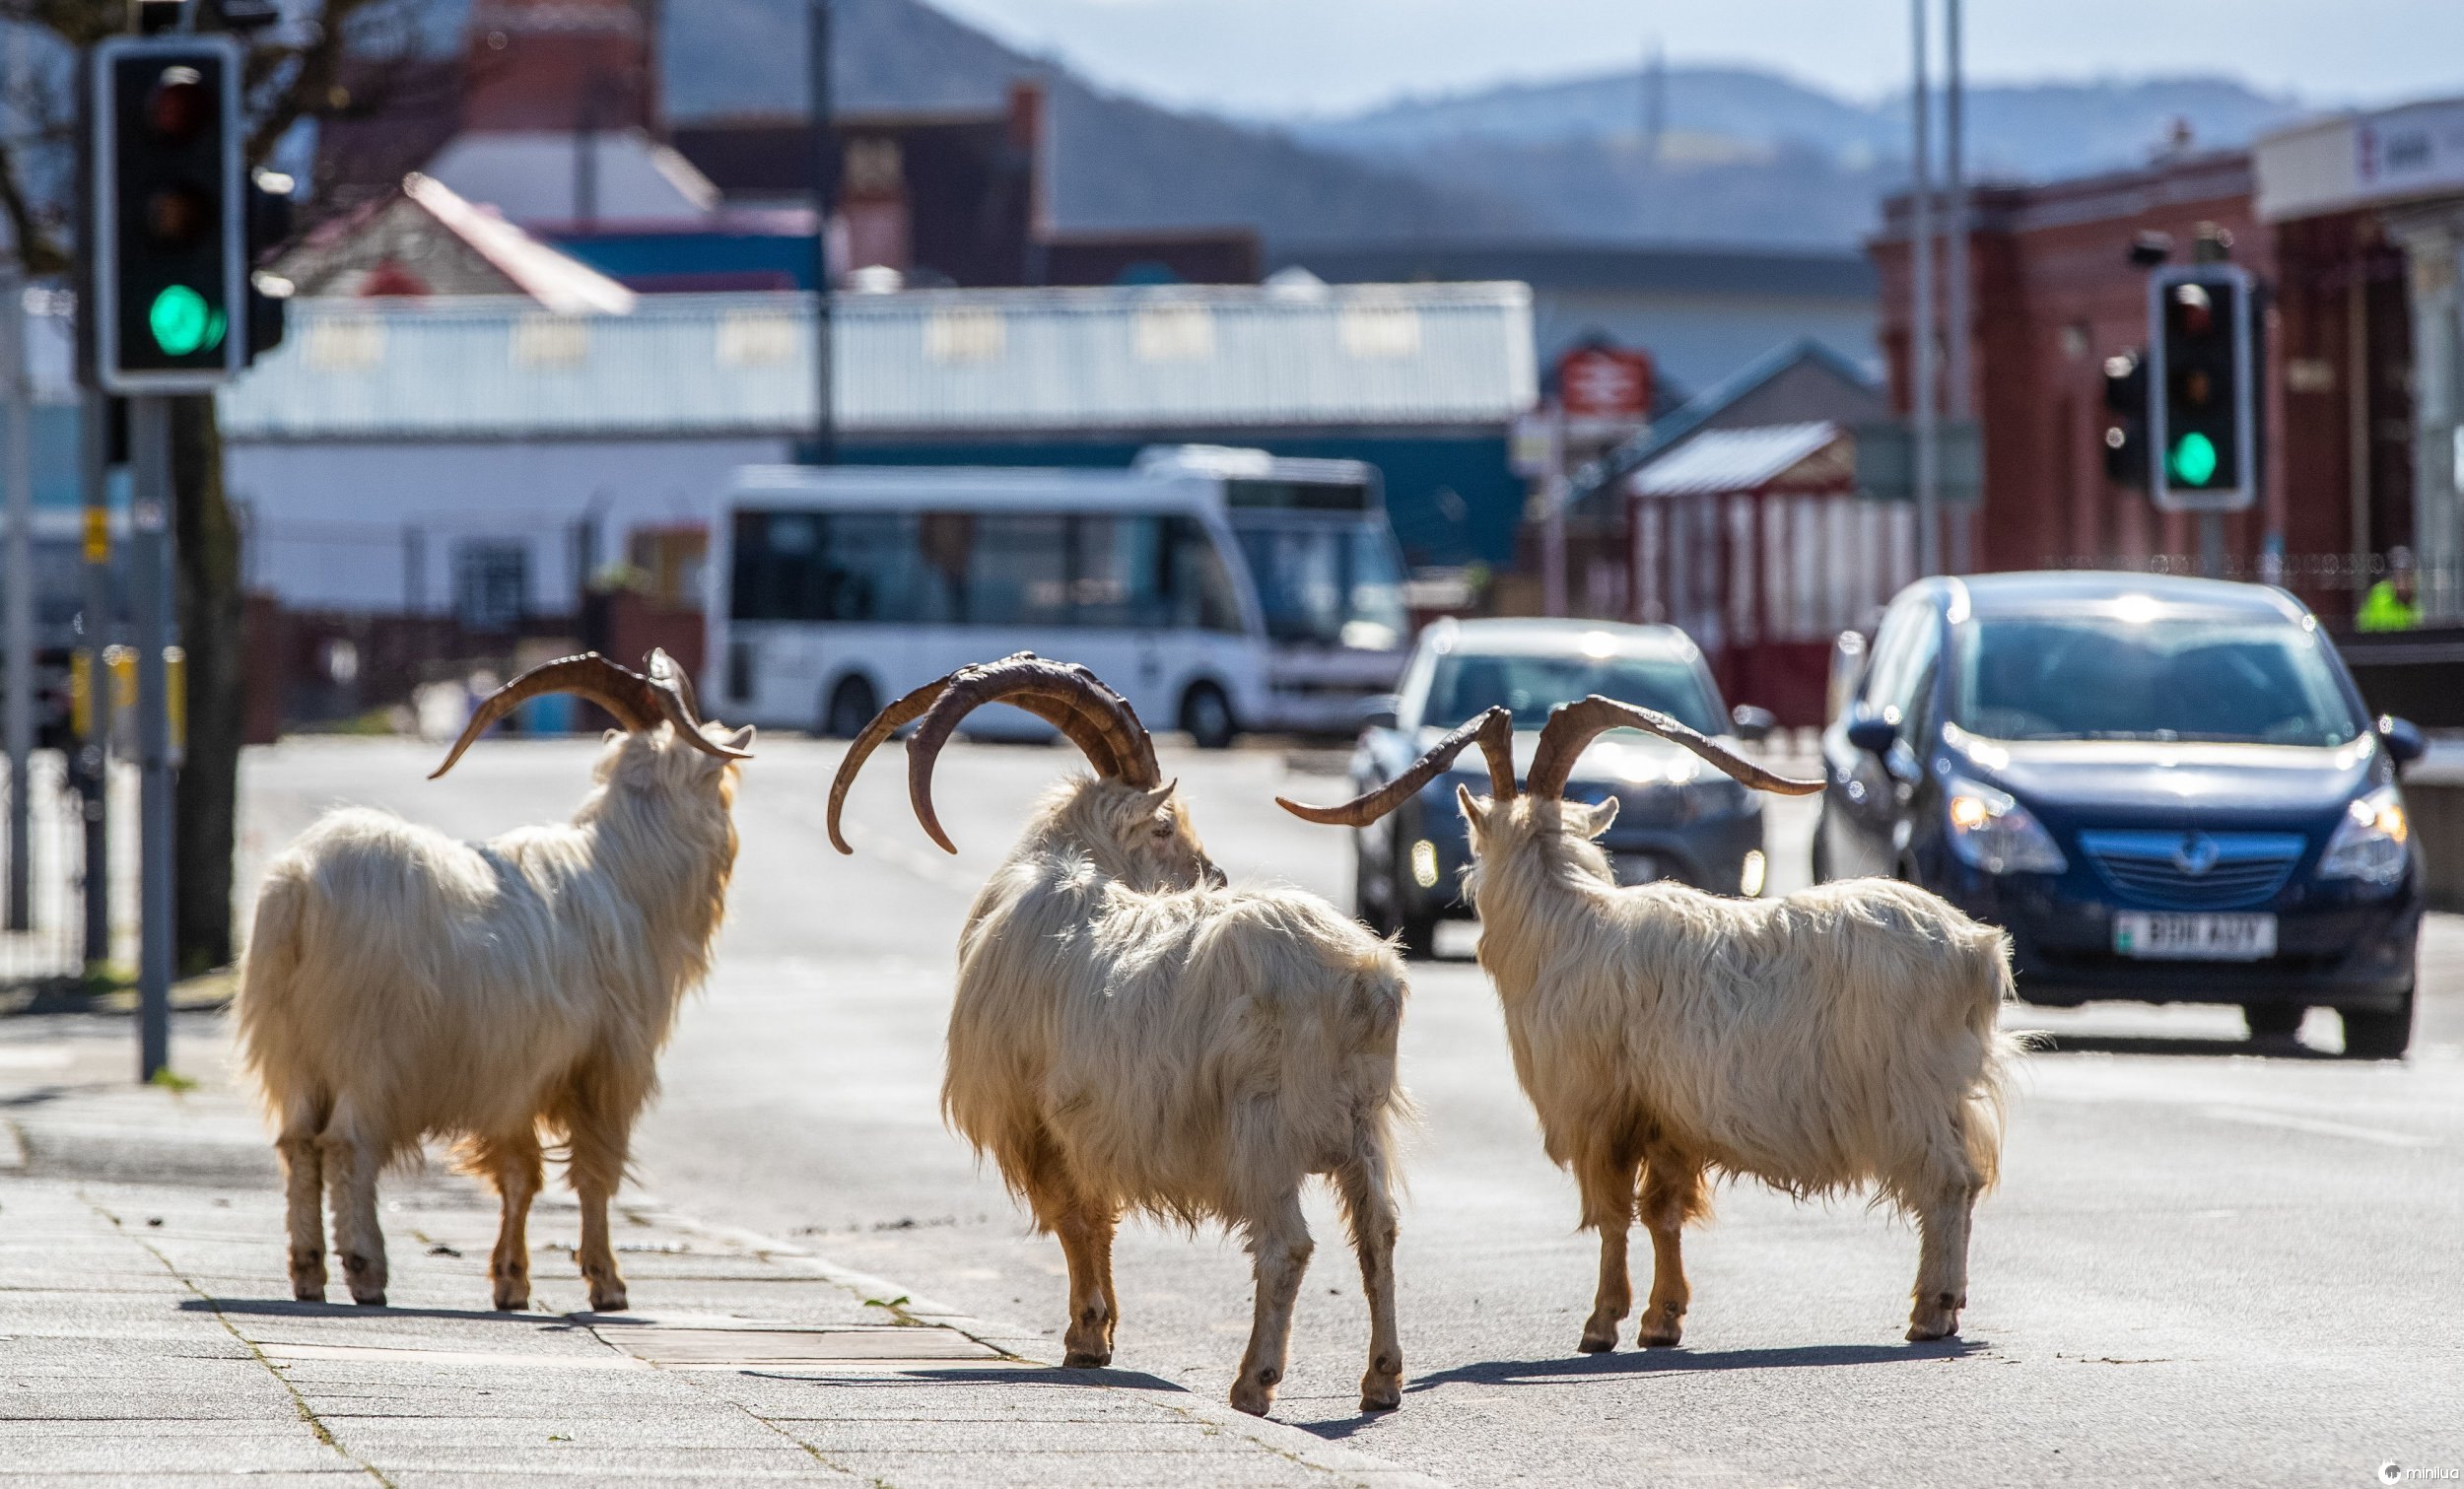 A herd of goats take advantage of quiet streets in Llandudno, north Wales. PA Photo. A gang of goats has been spotted strolling around the deserted streets of the seaside town during the nationwide lockdown. Picture date: Monday December 9, 2019. See PA story HEALTH Coronavirus Goats. Photo credit should read: Peter Byrne/PA Wire